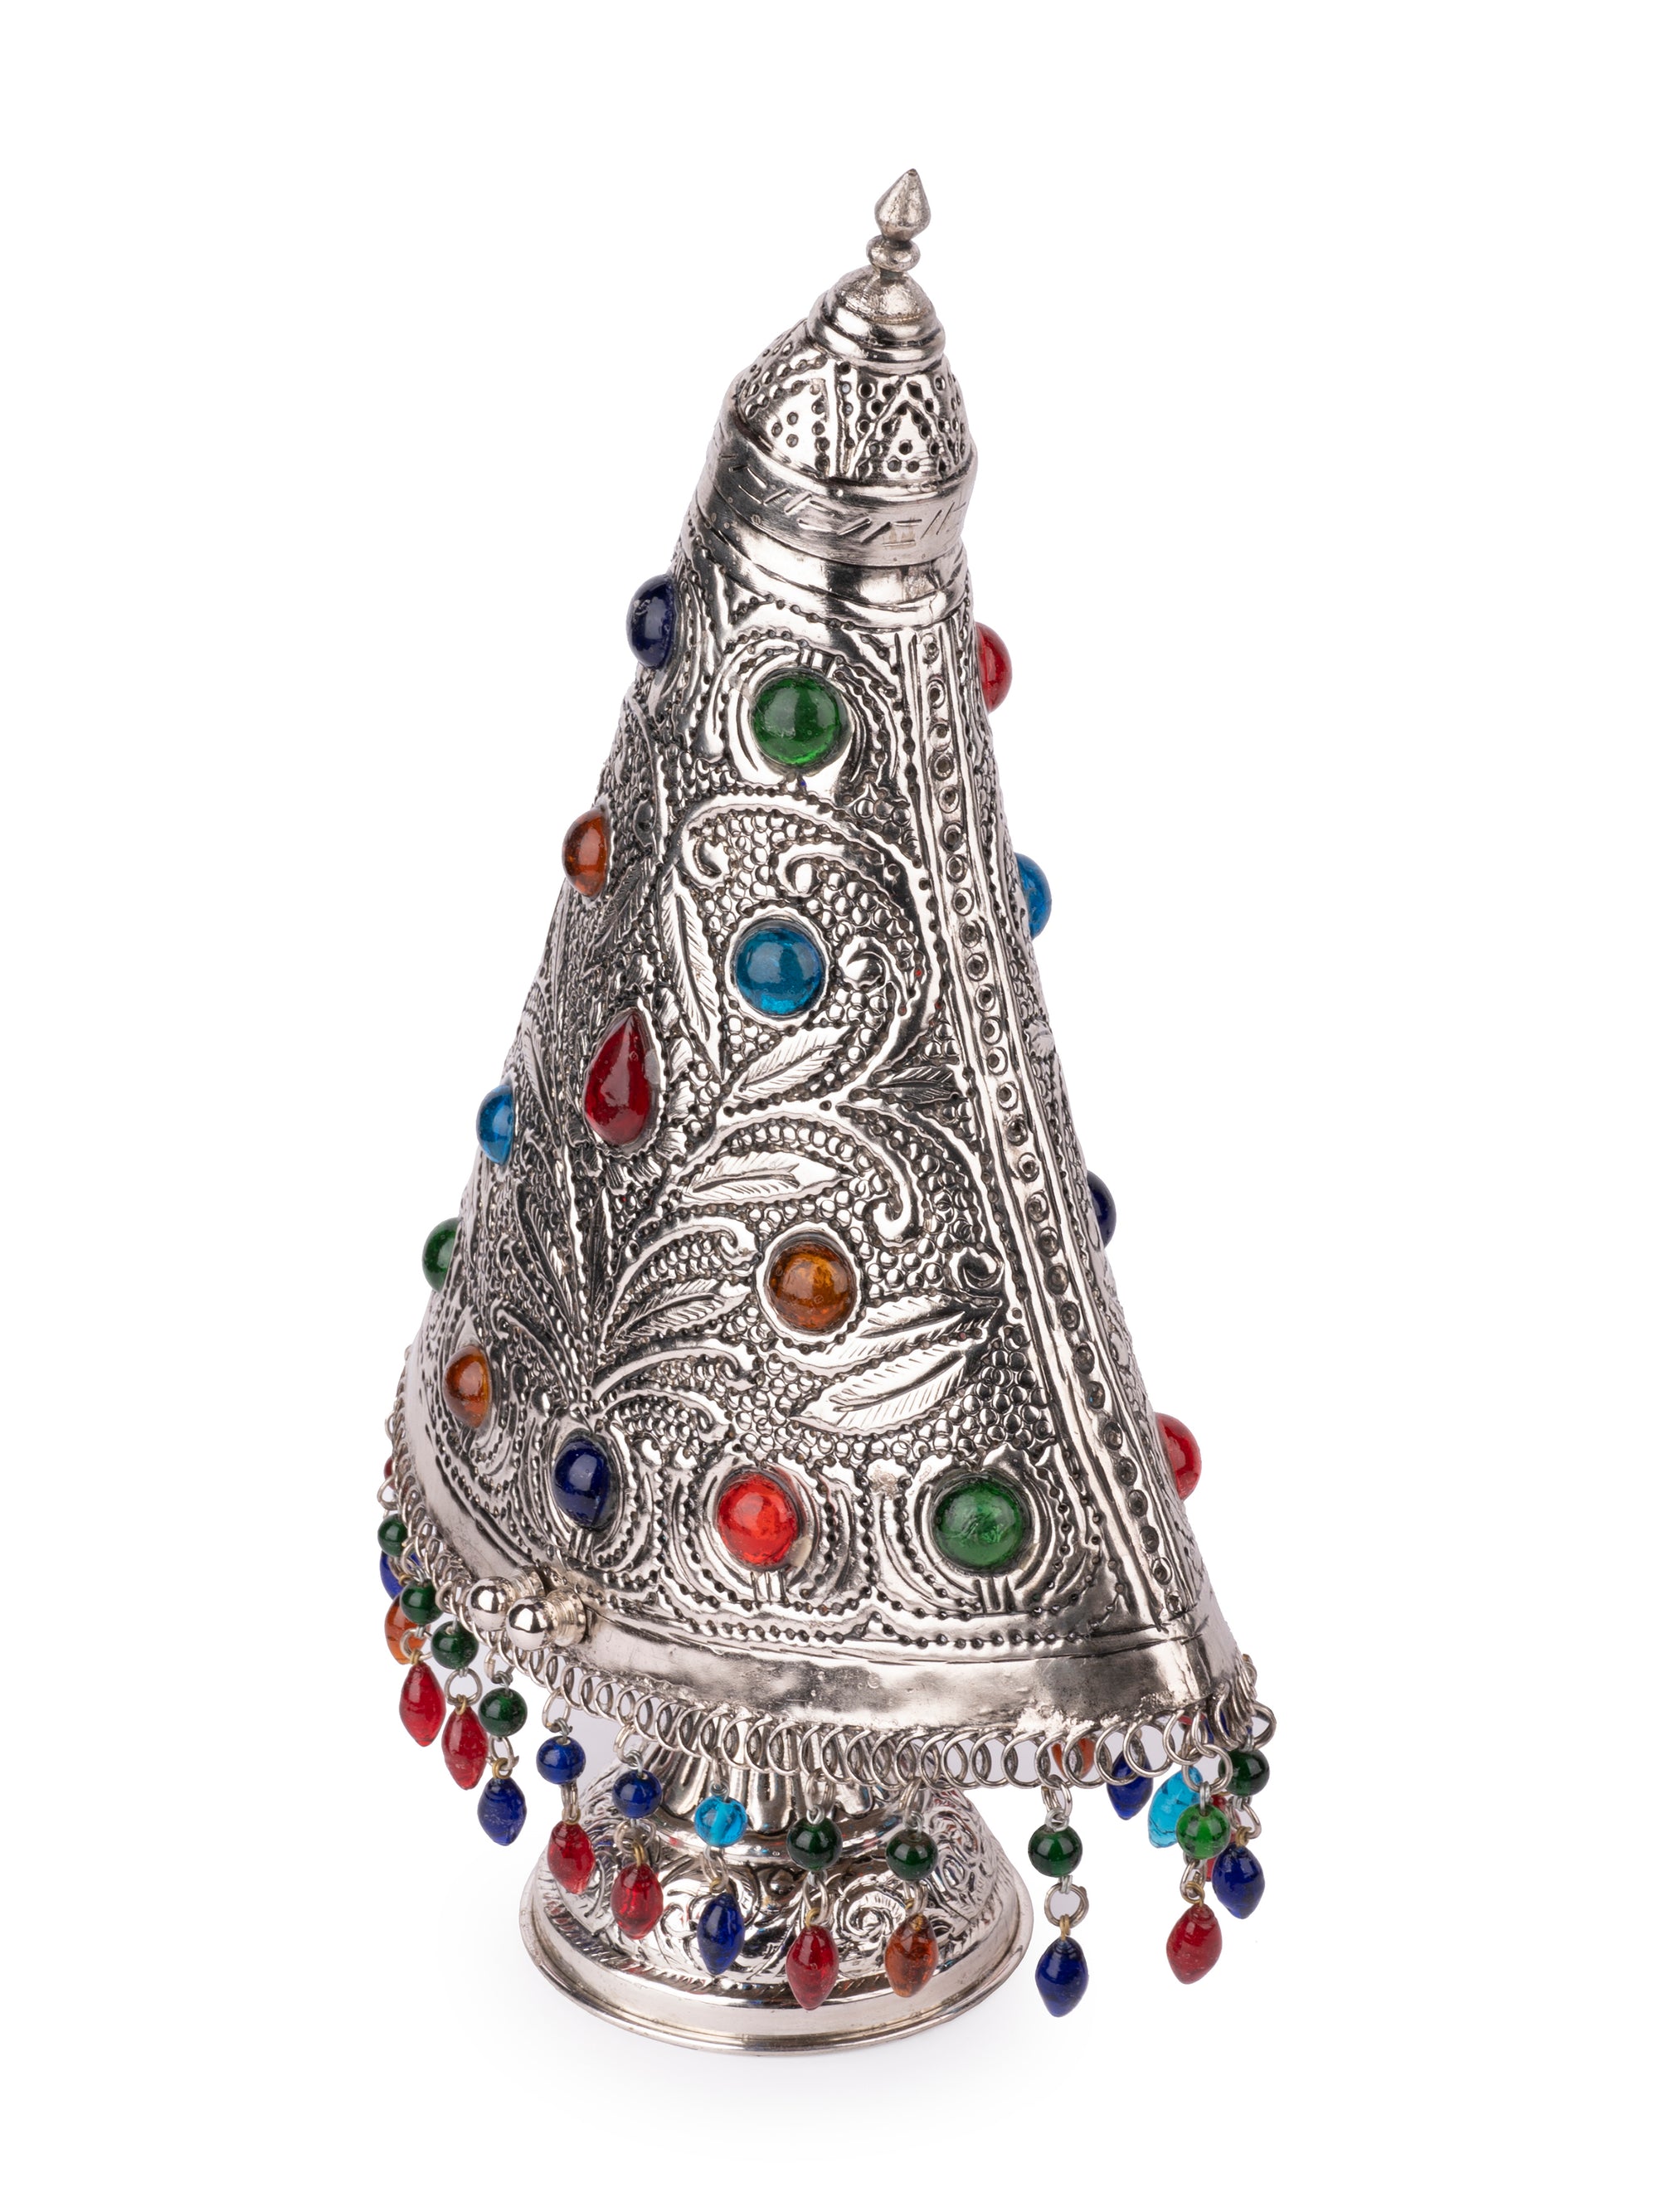 Conical Metal Table Lamp Embellished with Colorful Stones - 16 inches height - The Heritage Artifacts